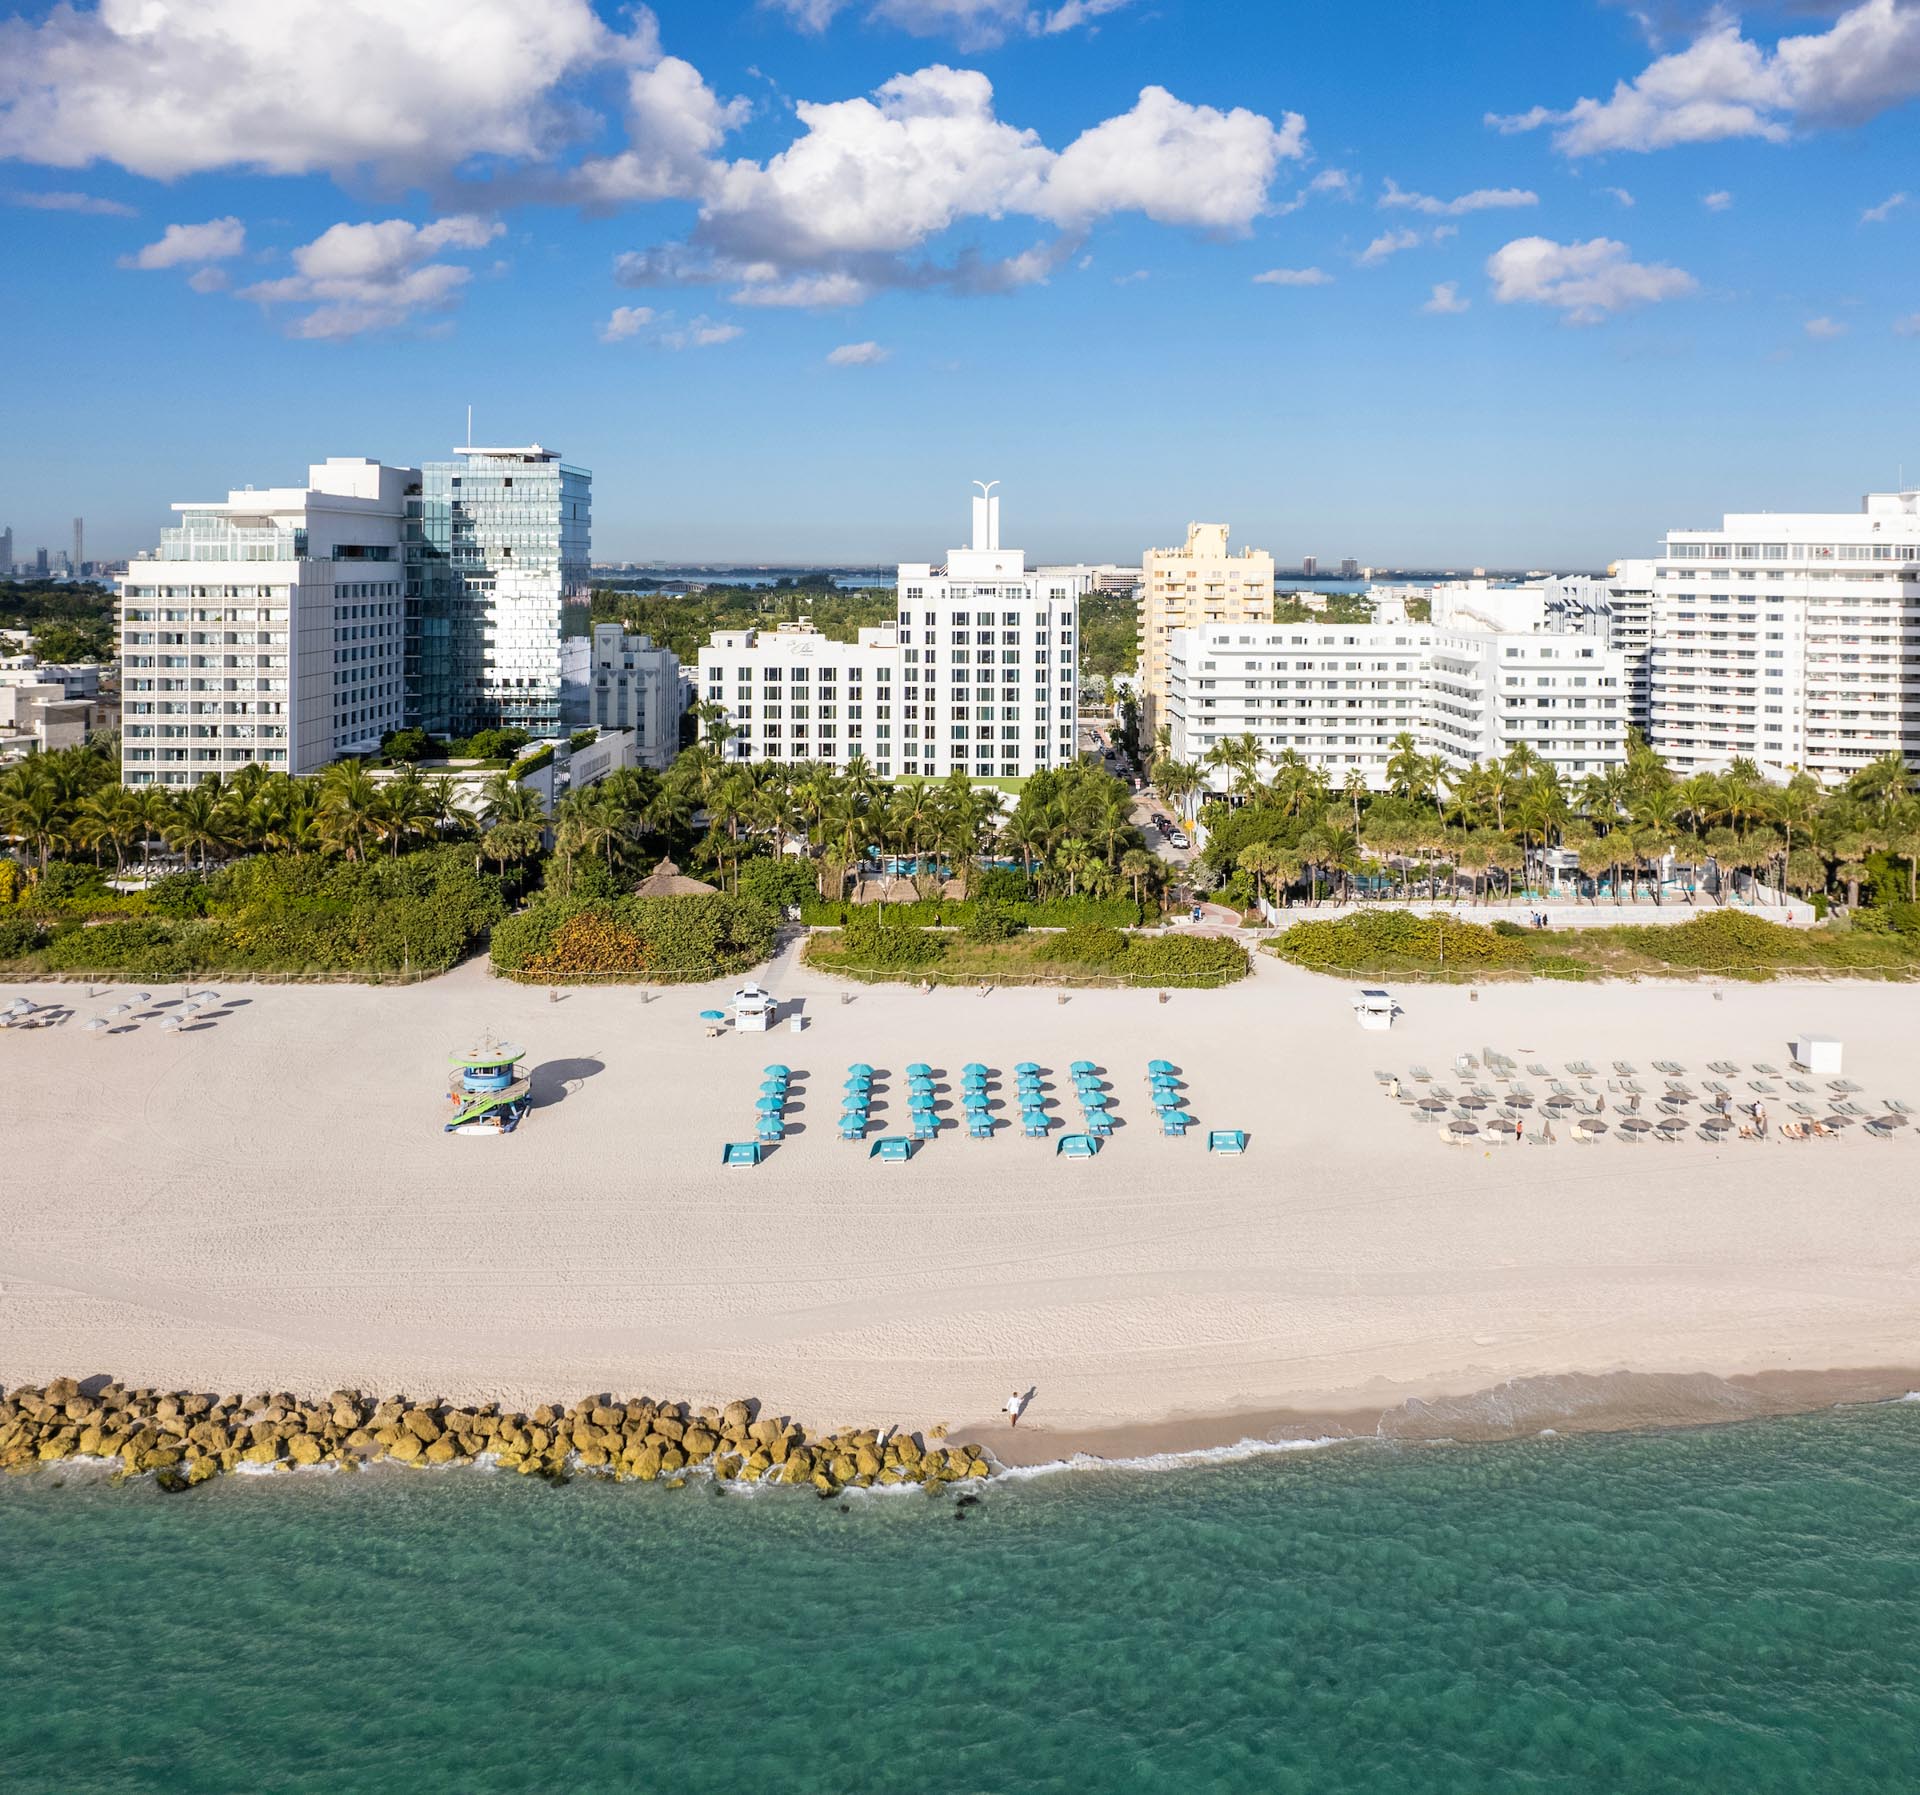 The Palms Hotel and Beach Aerial 